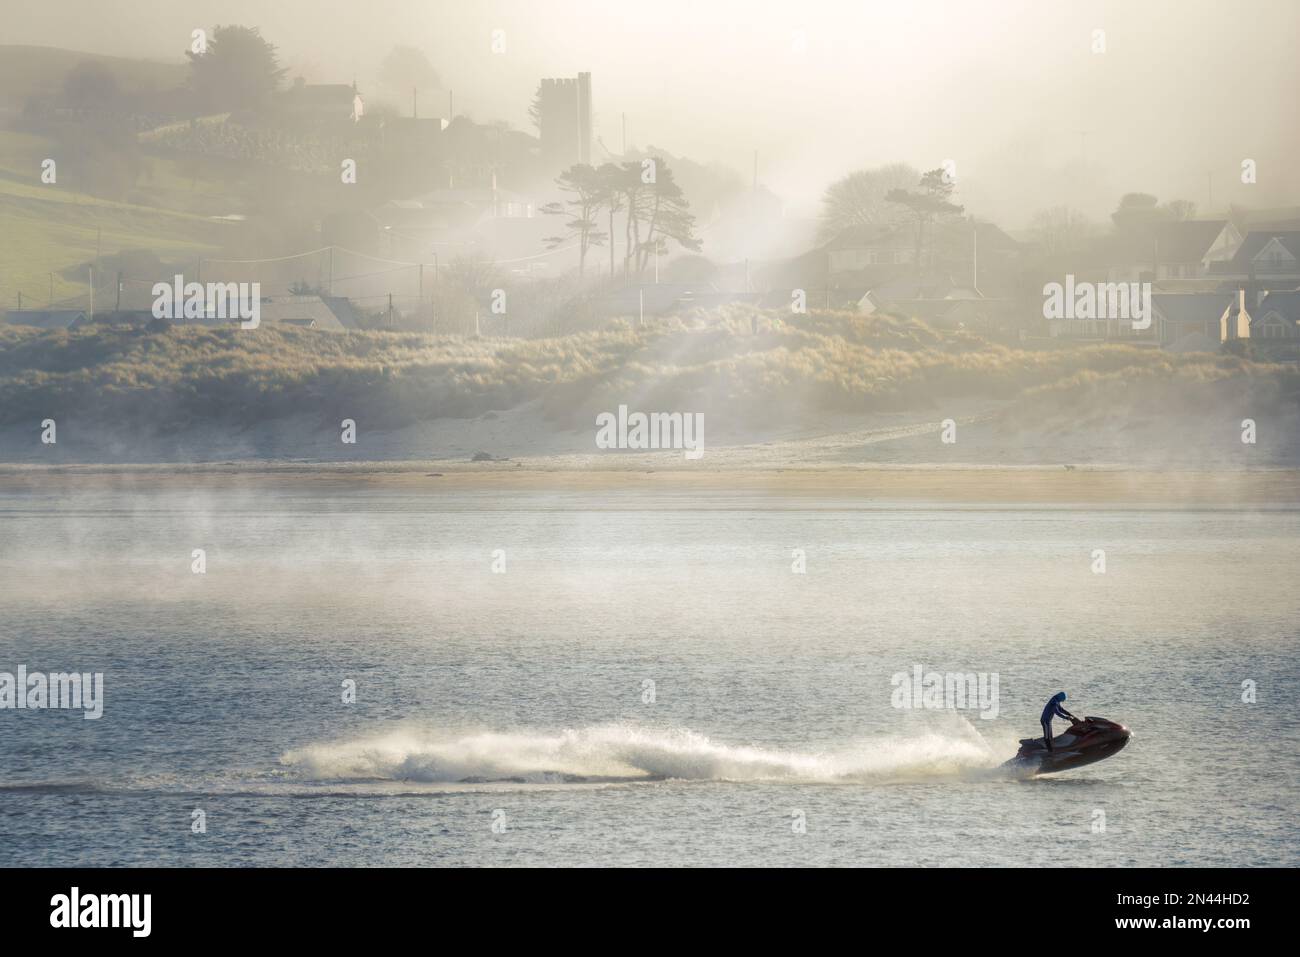 After another cold night in North Devon, a jet ski breaks the tranquility of a mist shrouded River Torridge as the sun starts to burn off the low lying sea mist over the coastal village of Instow. Credit: Terry Mathews/Alamy Live News Stock Photo